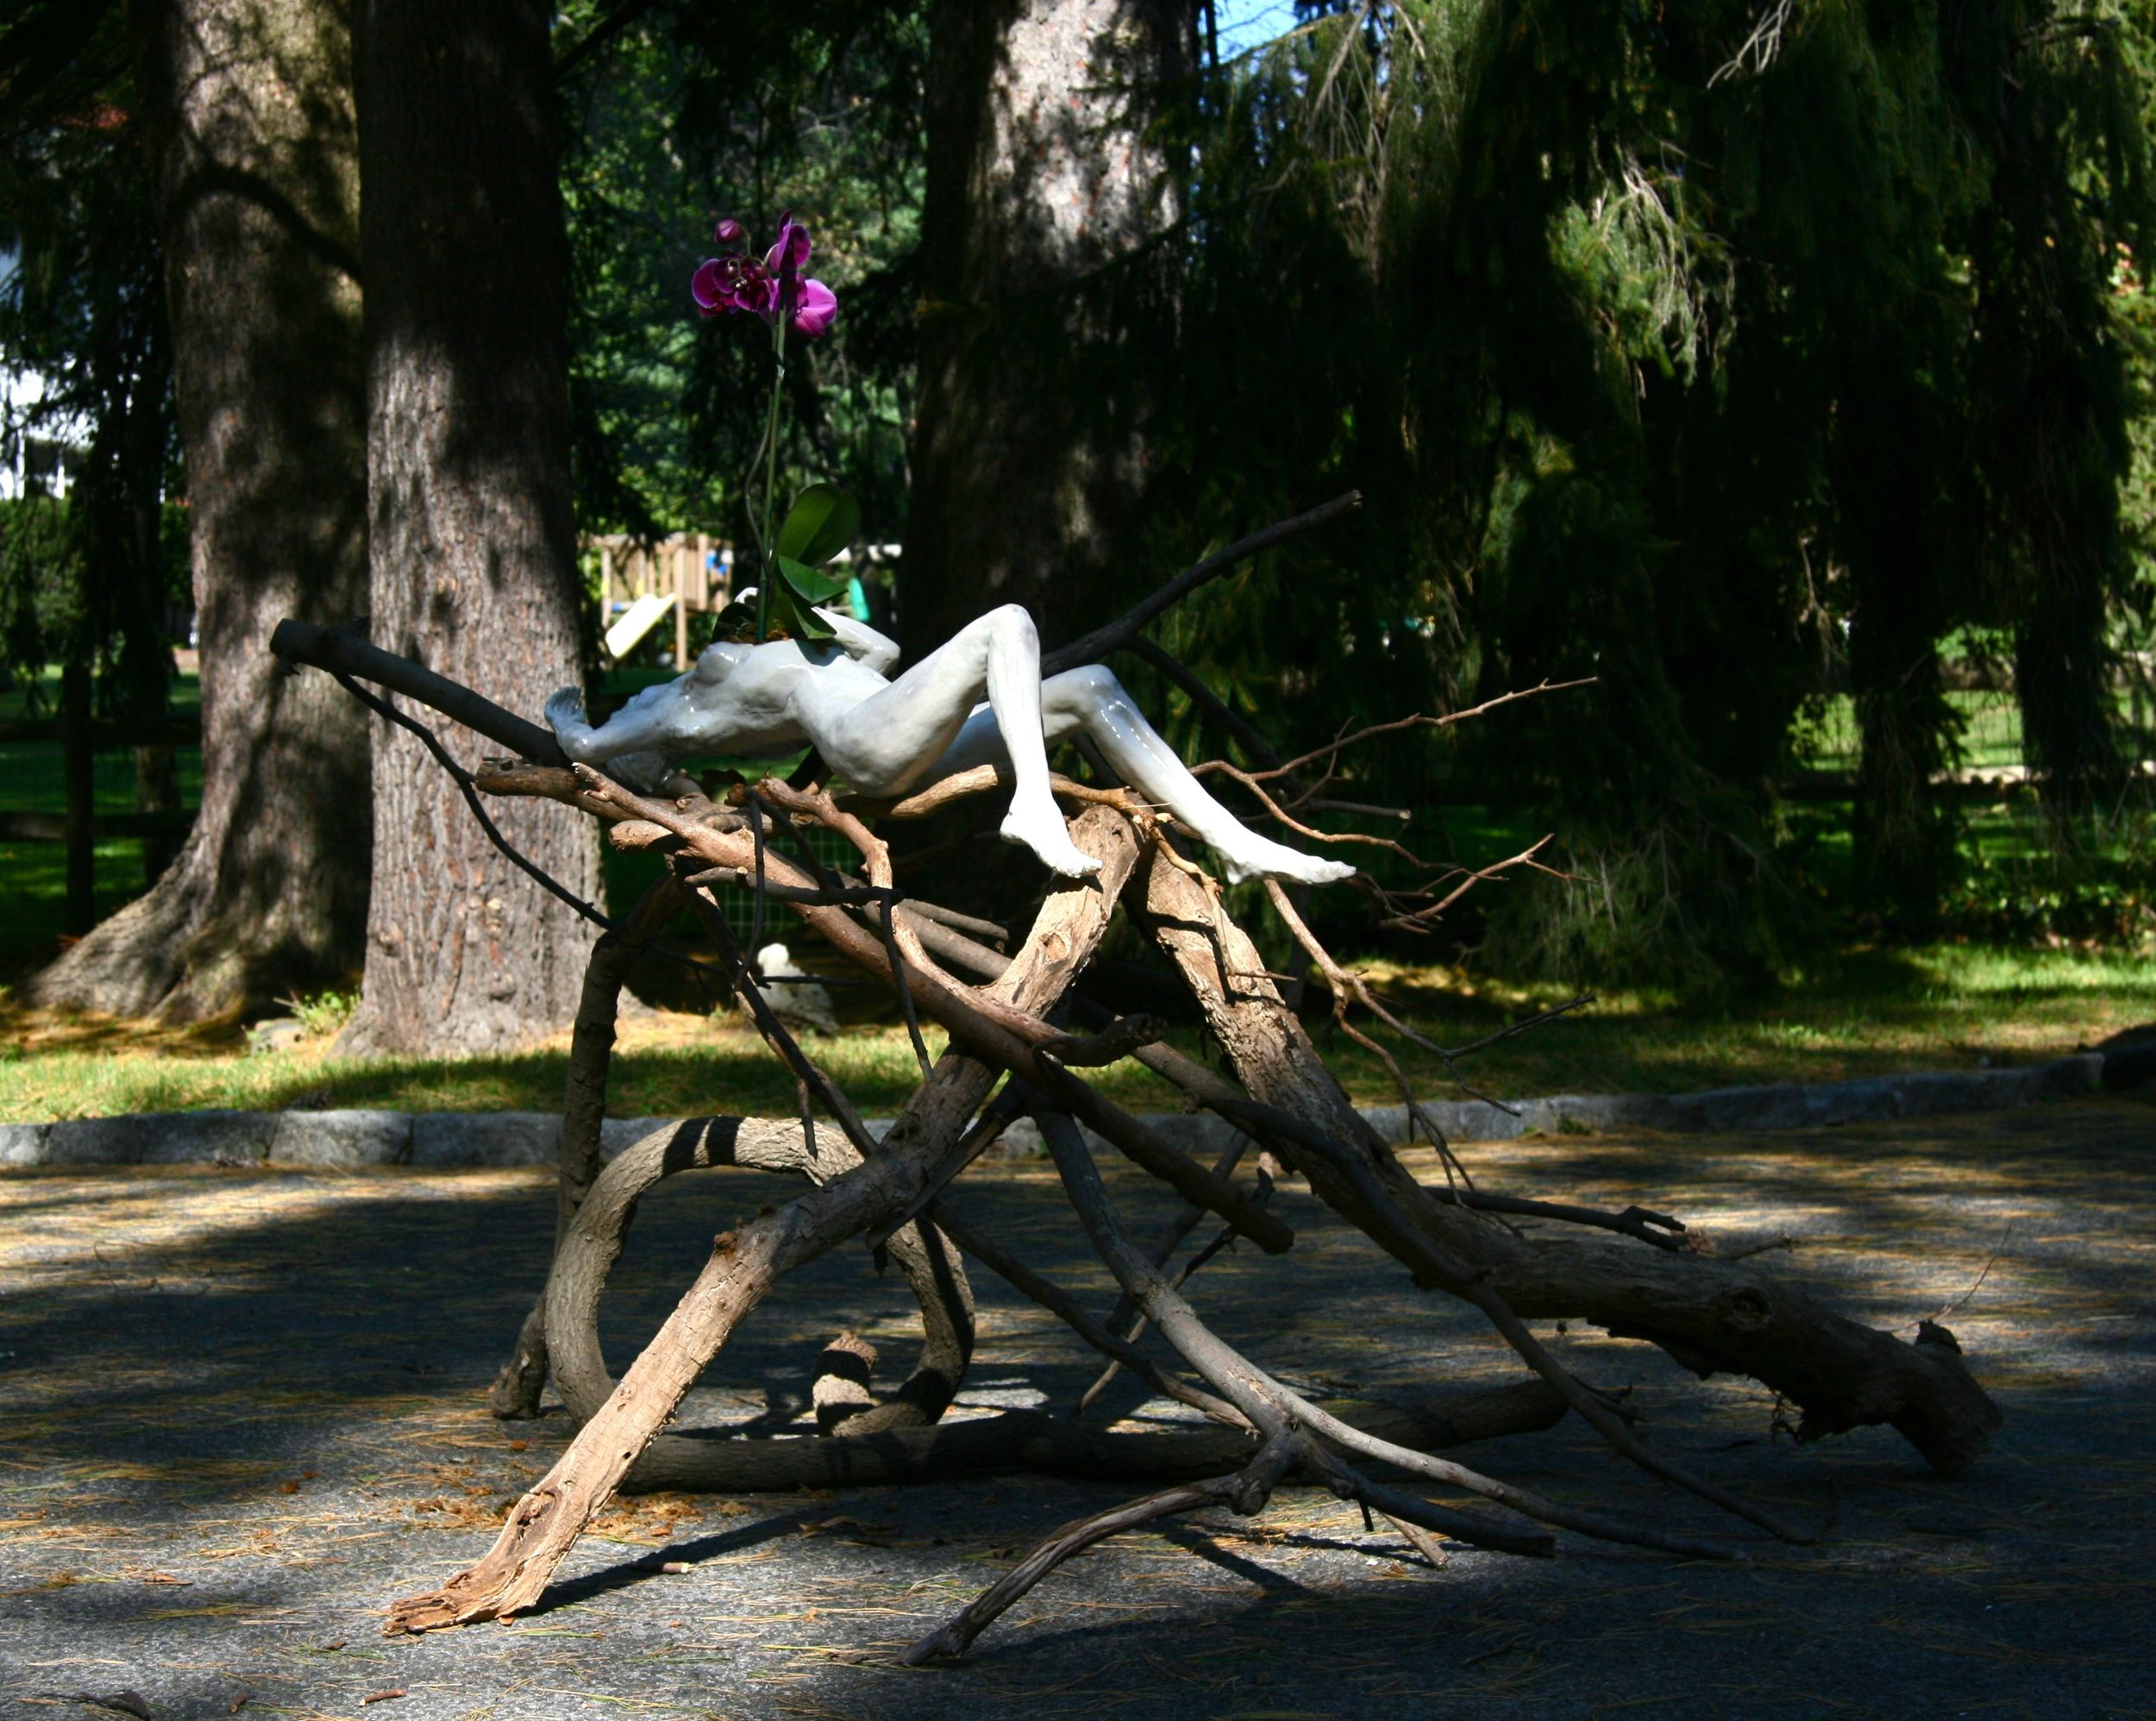   Woman with Orchid, on branches, installation view,  5'x6'x40"H, raku-fired stoneware, branches, orchid 